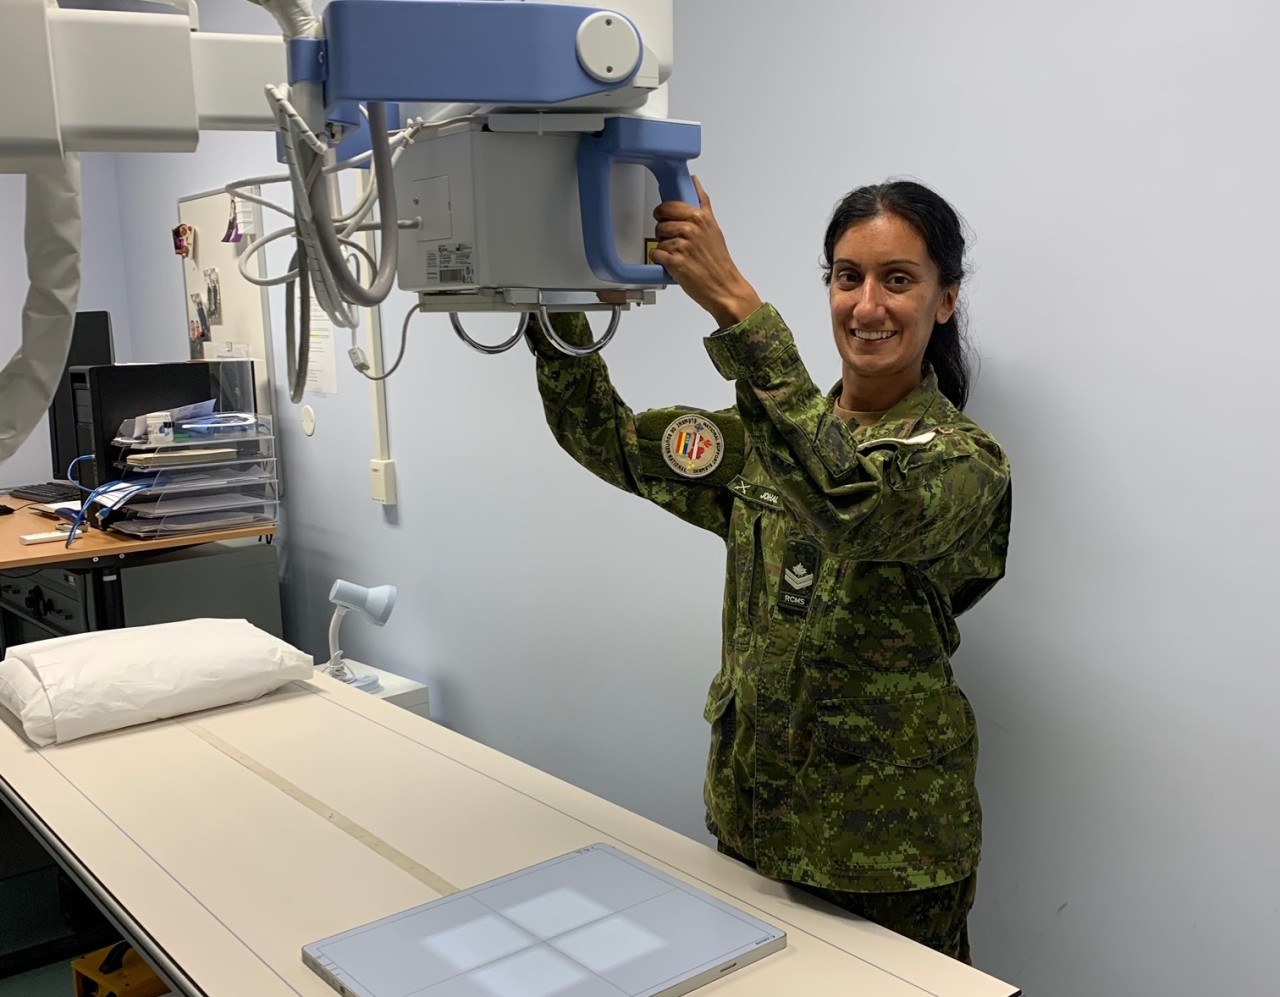 MRAD alumni dressed in military uniform poses with an overhead x-ray machine.